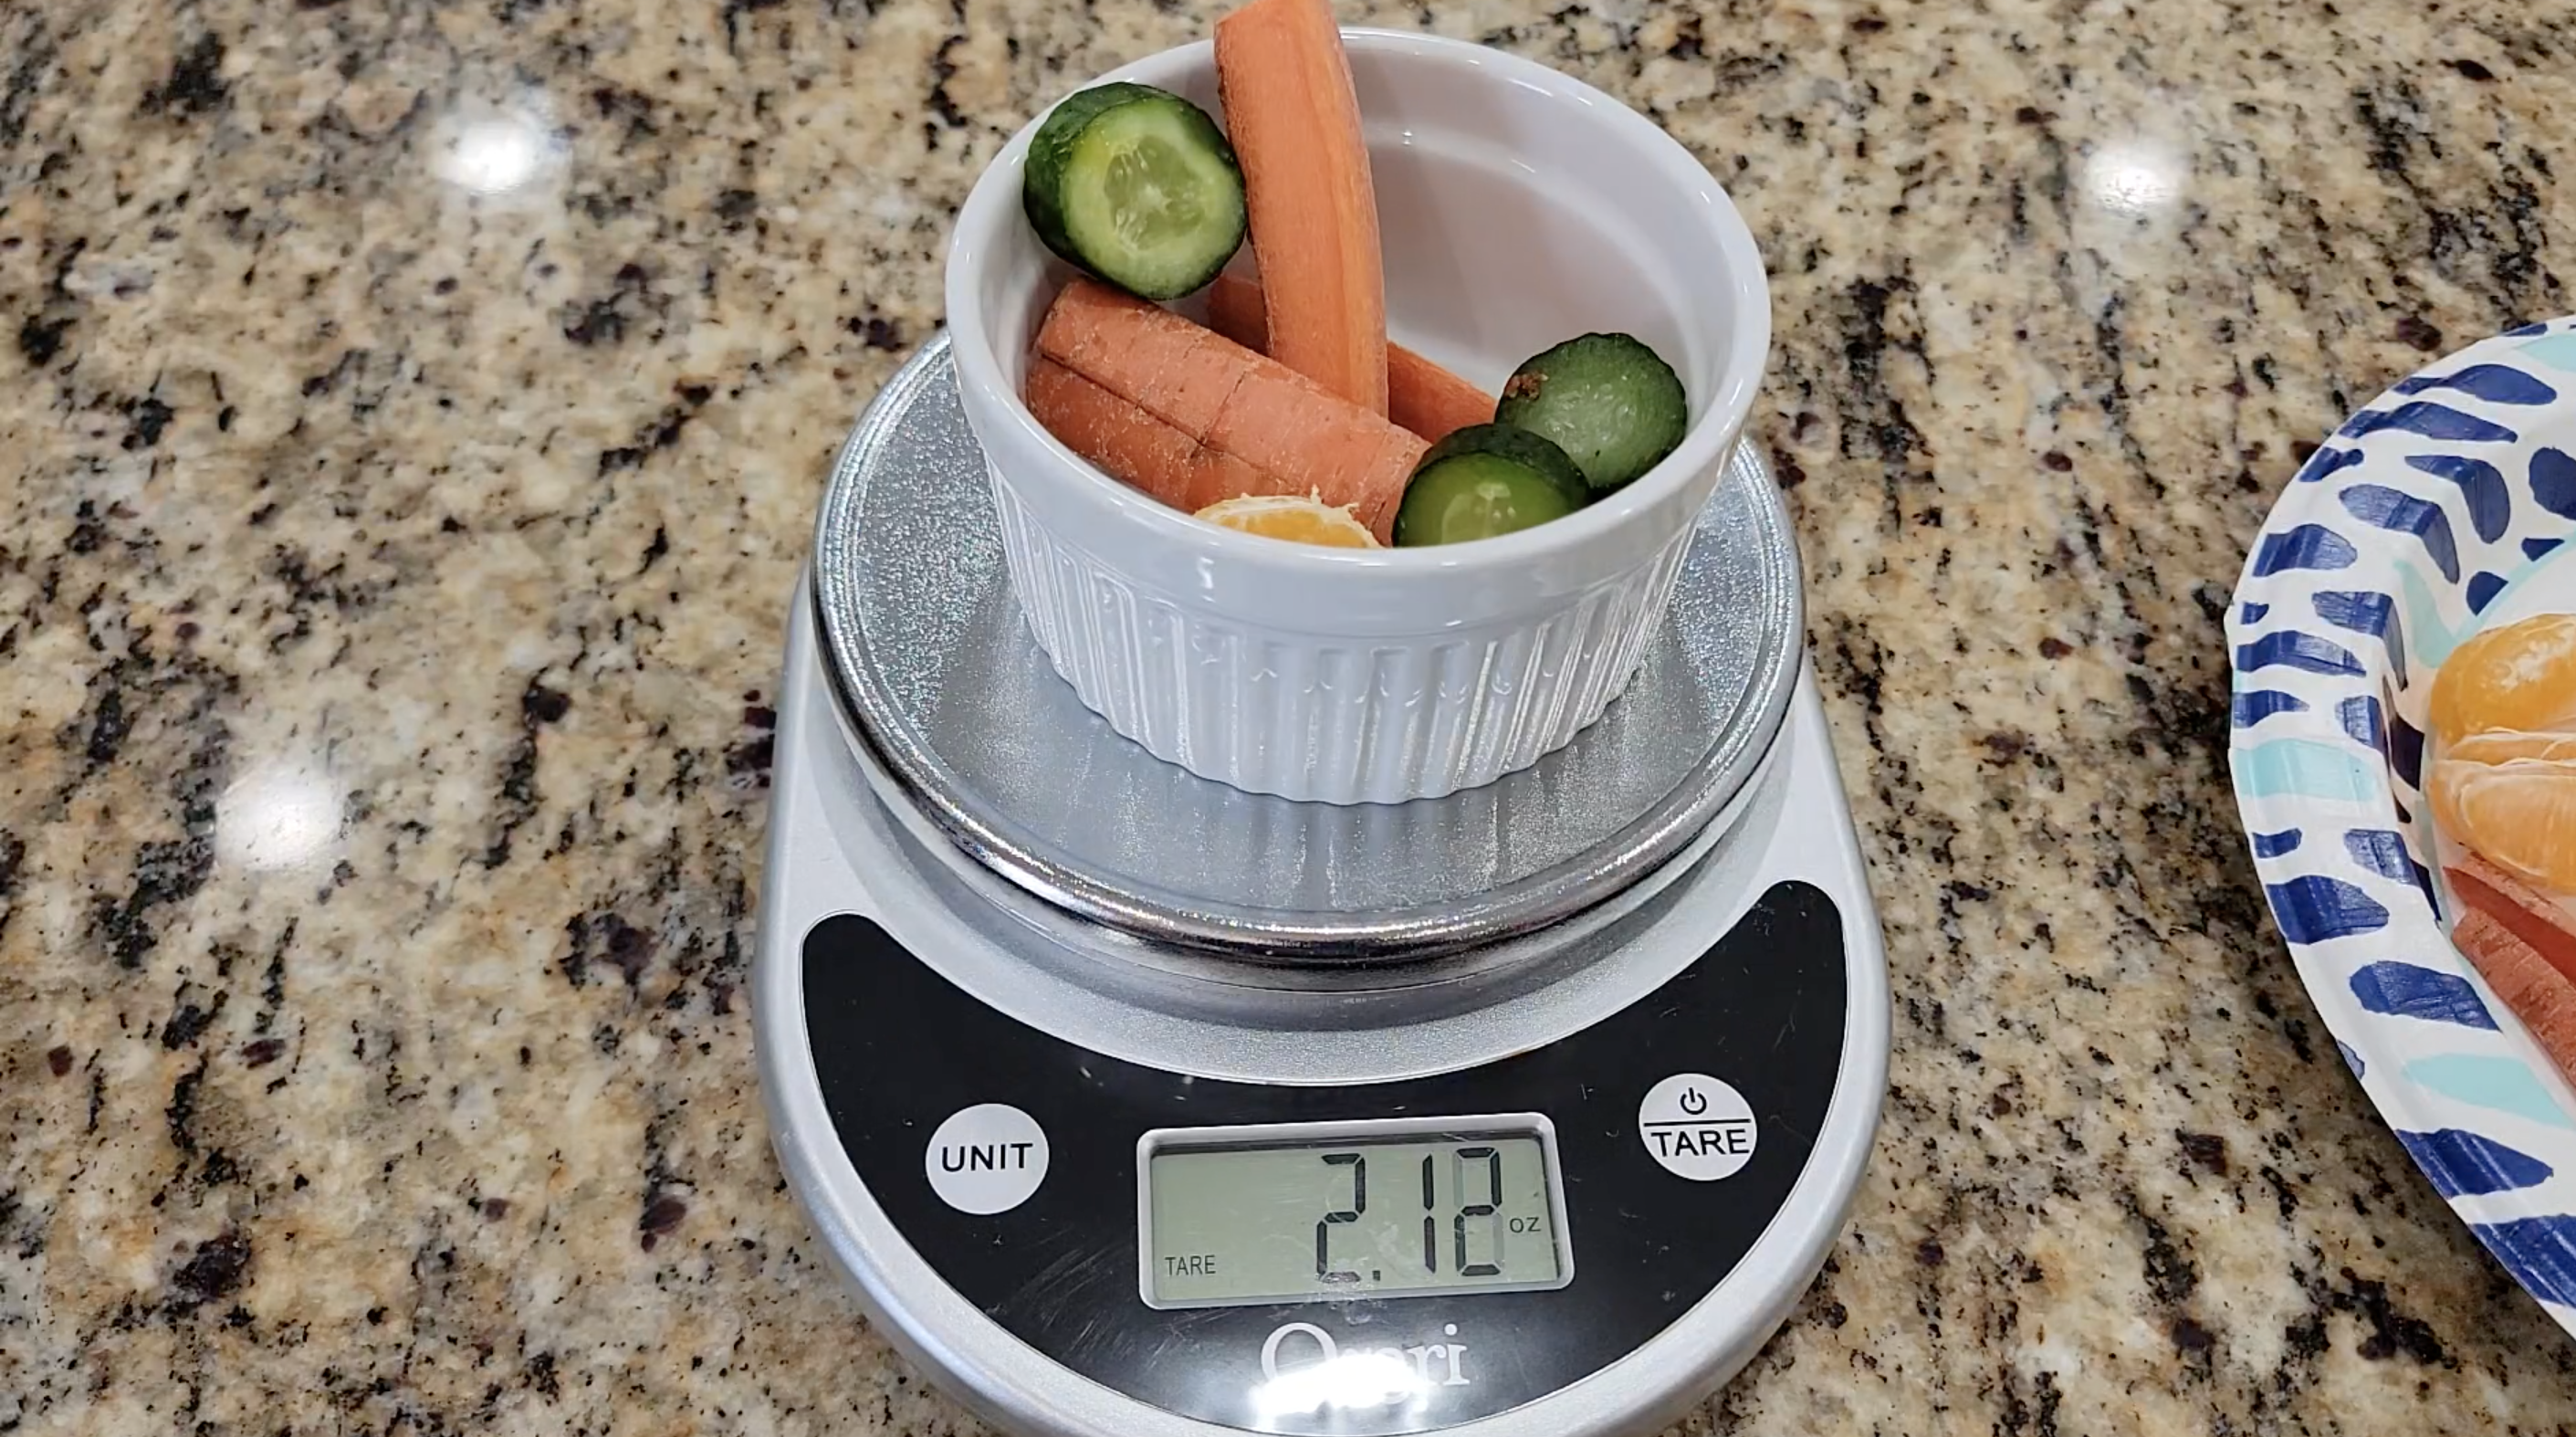 Food scale vs measuring cup for weighing food